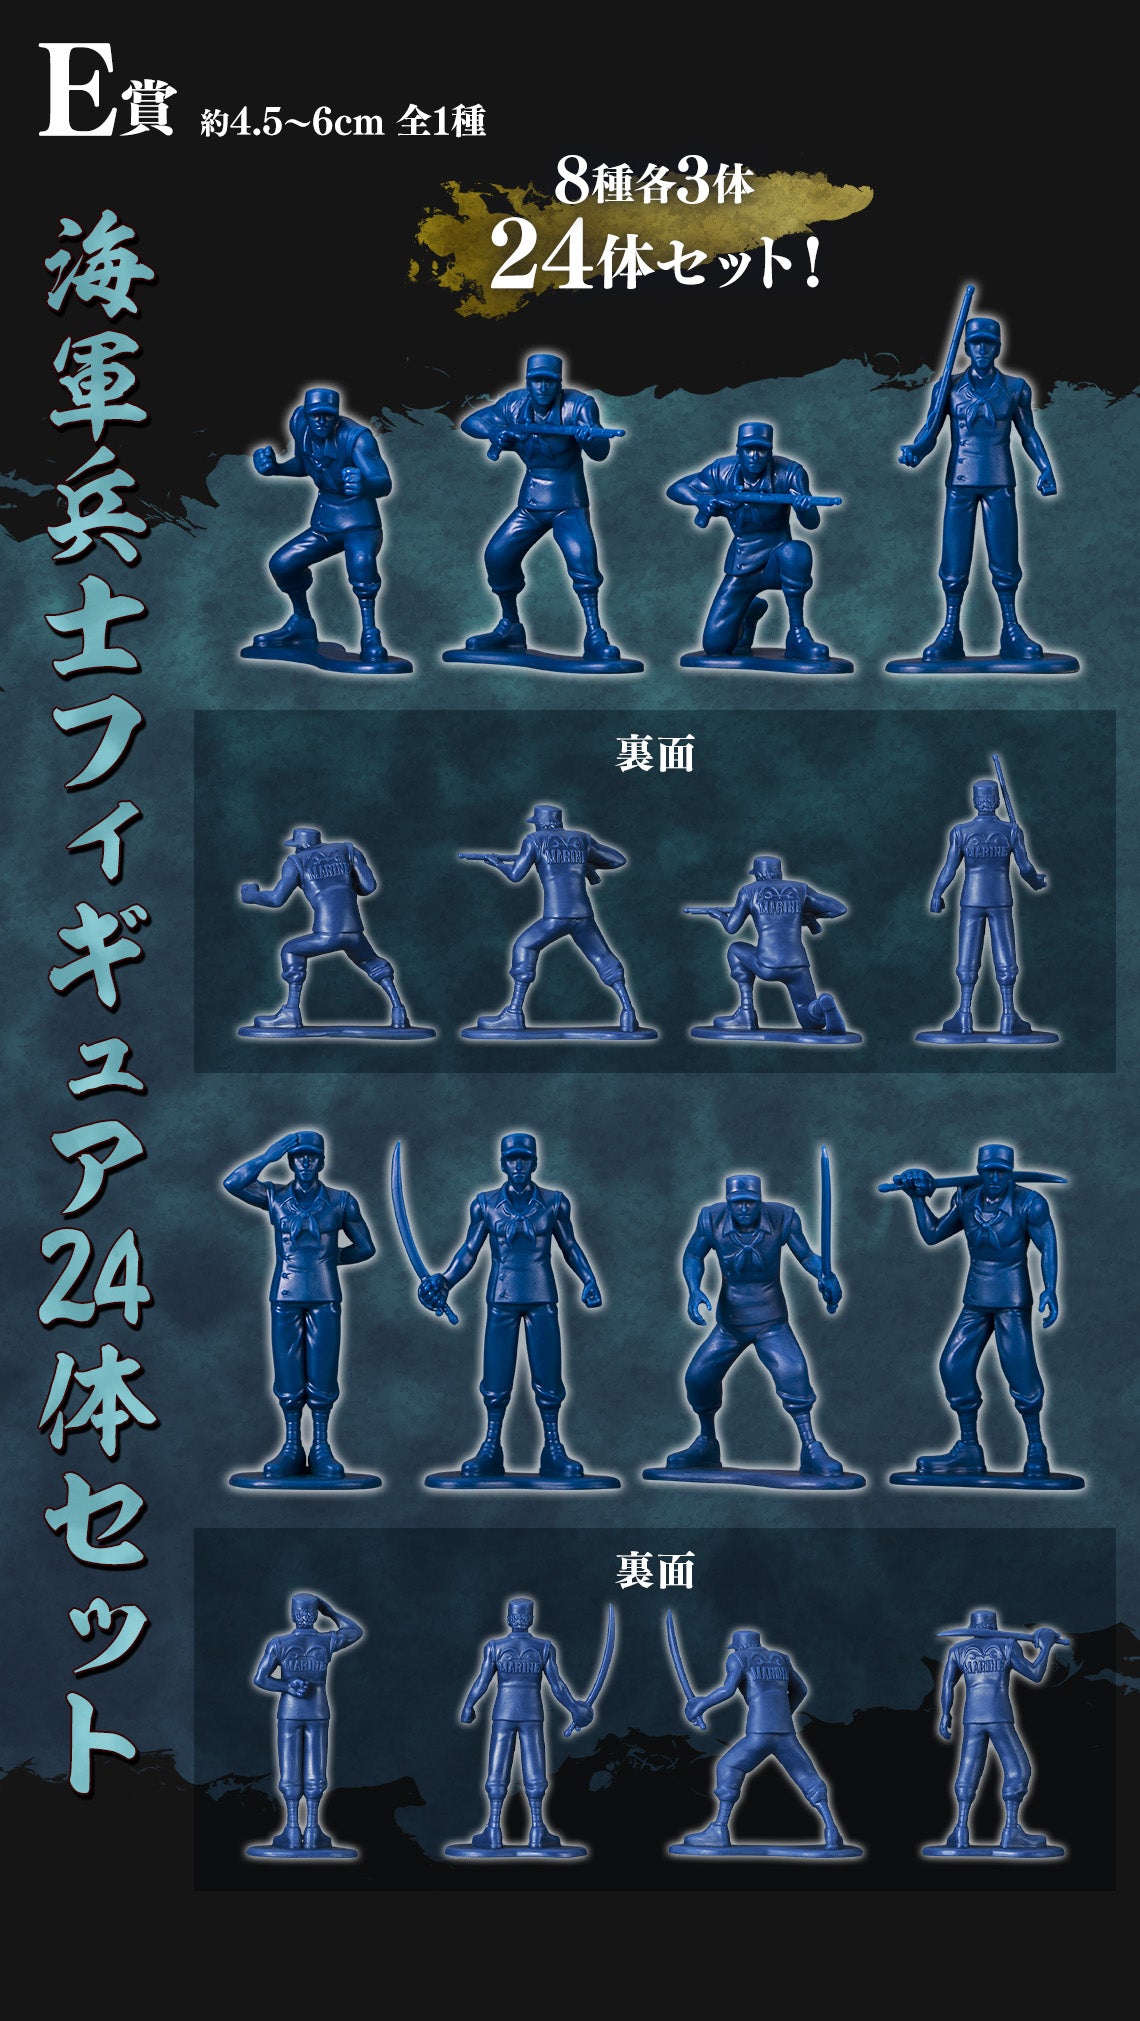 ONE PIECE FIGURE ICHIBAN KUJI ABSOLUTE JUSTICE - E PRIZE - Set of 24 Navy Soldier Figures